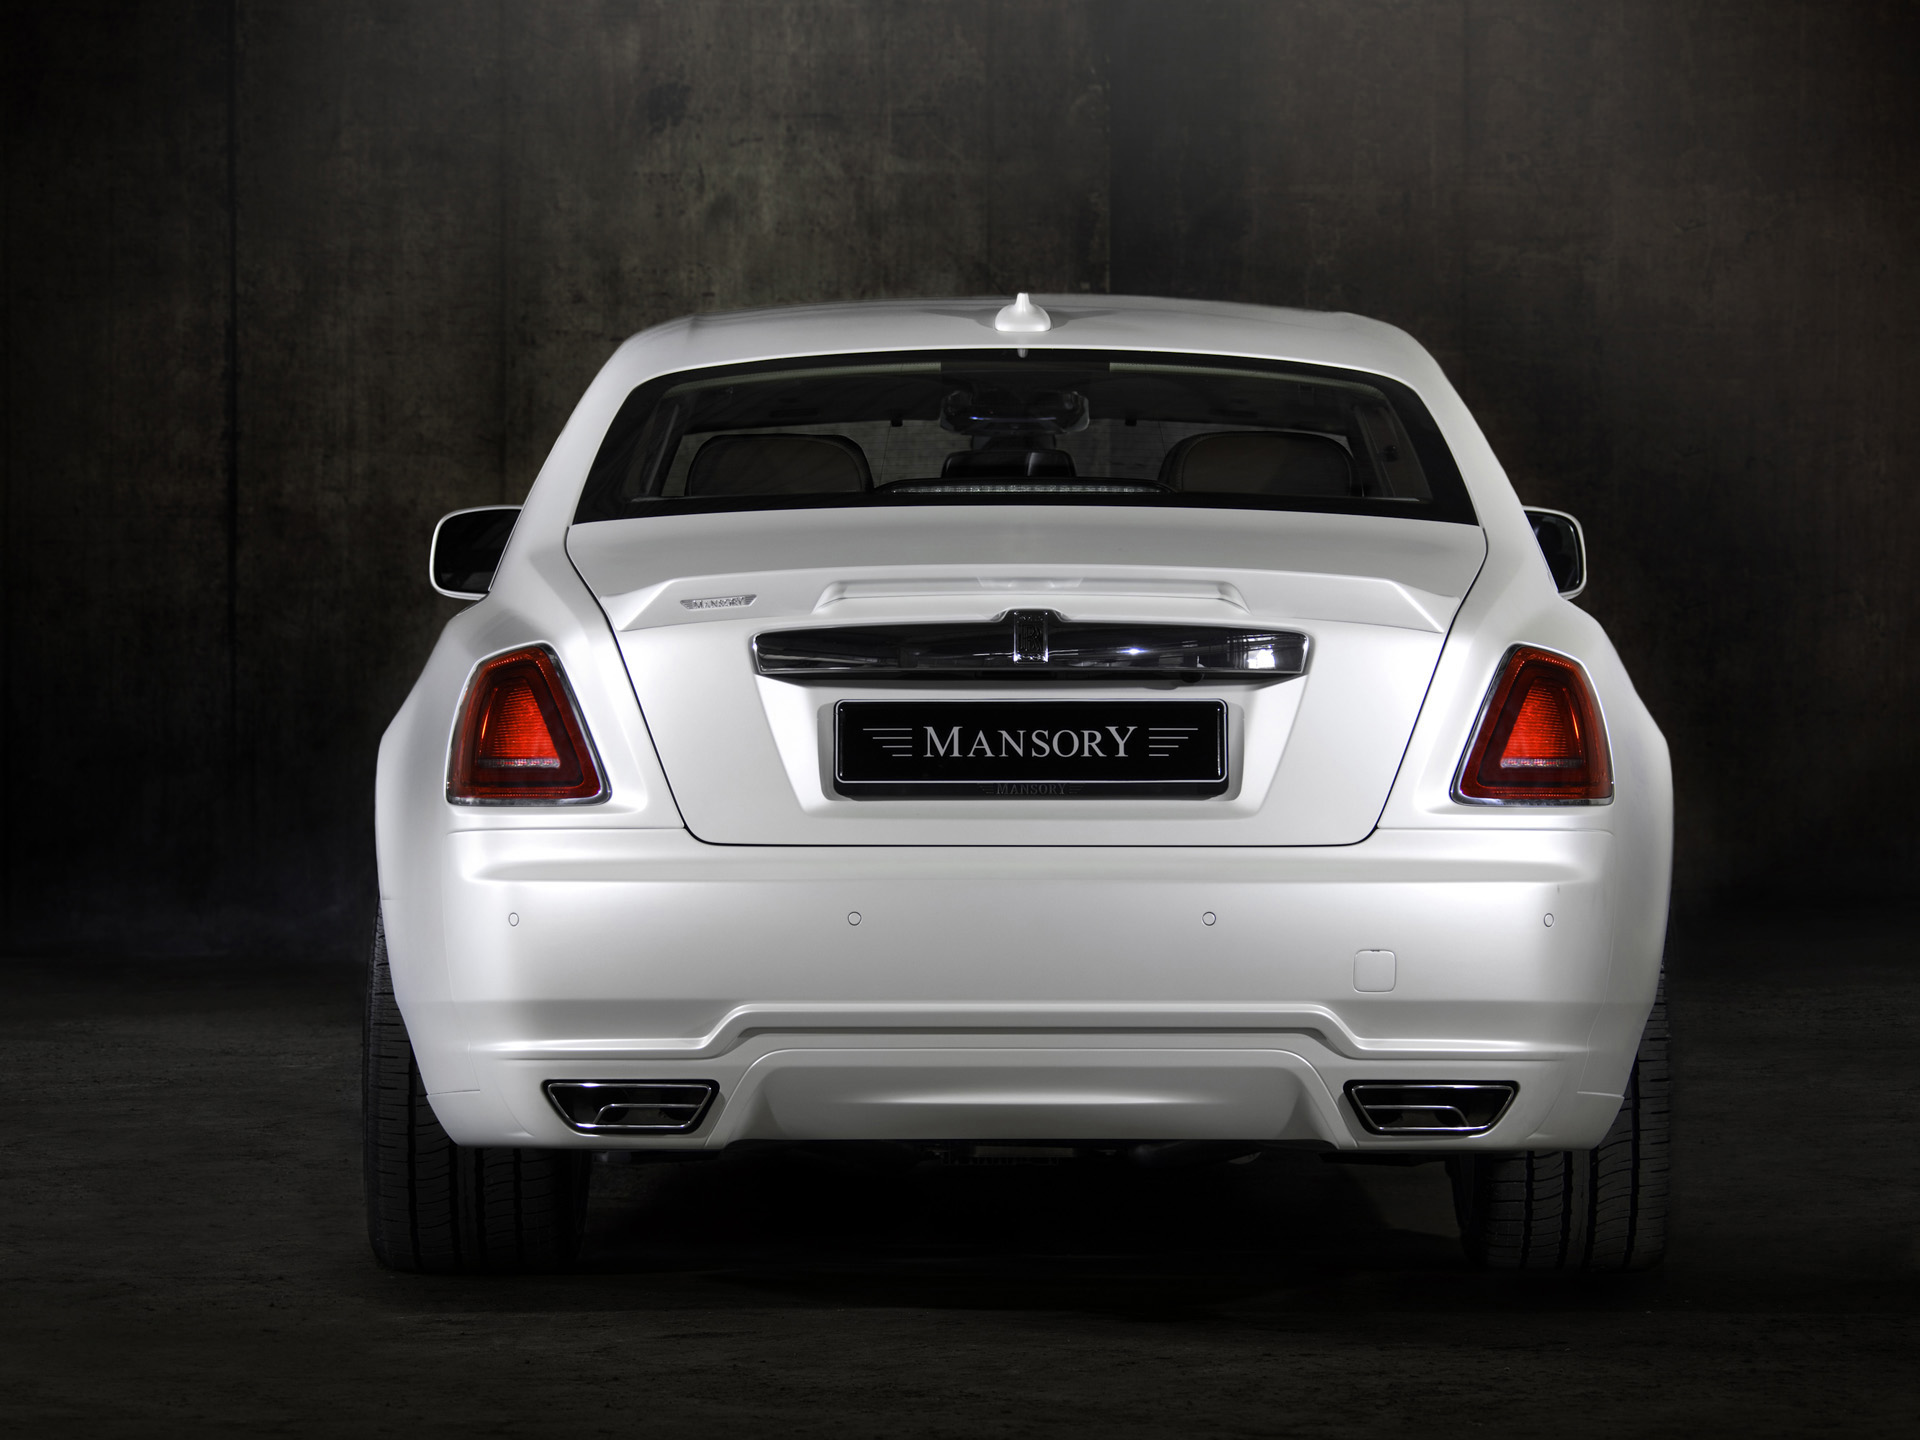 2010 Mansory Rolls-Royce(˹˹) White Ghost Limited(ֽ5)